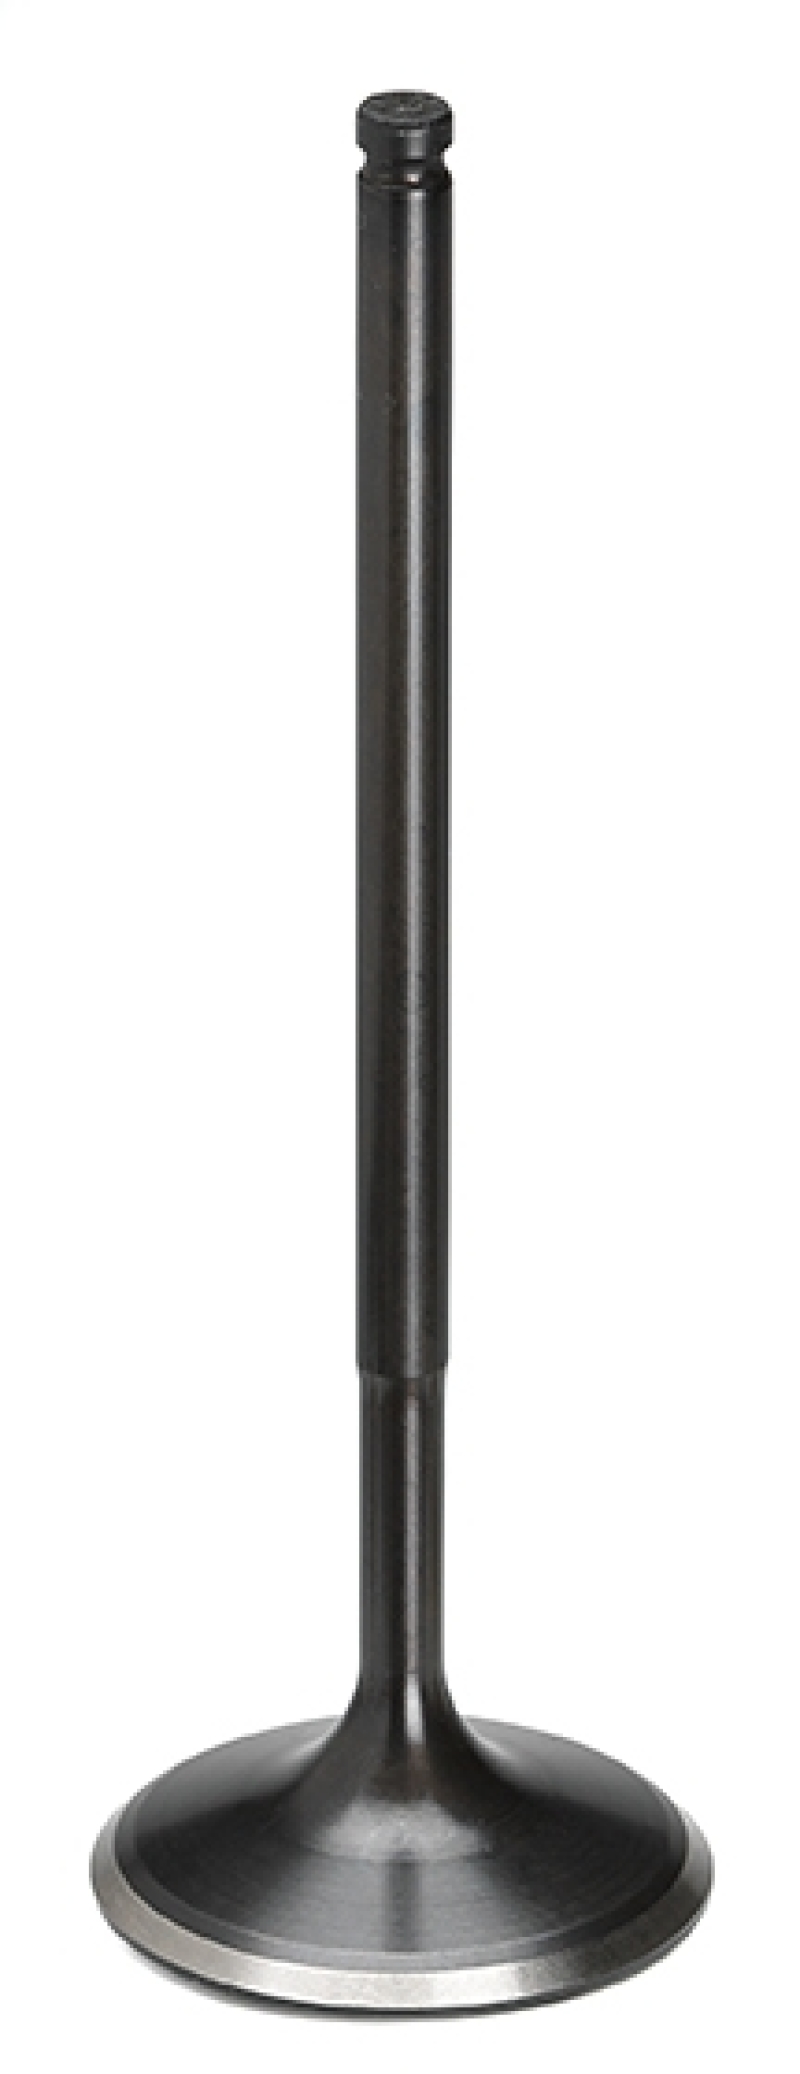 Supertech Mazda/Ford Duratec 2.0L/2.3L Black Nitrided Intake Valve - Single (Drop Ship Only) - MAIVN-2301F